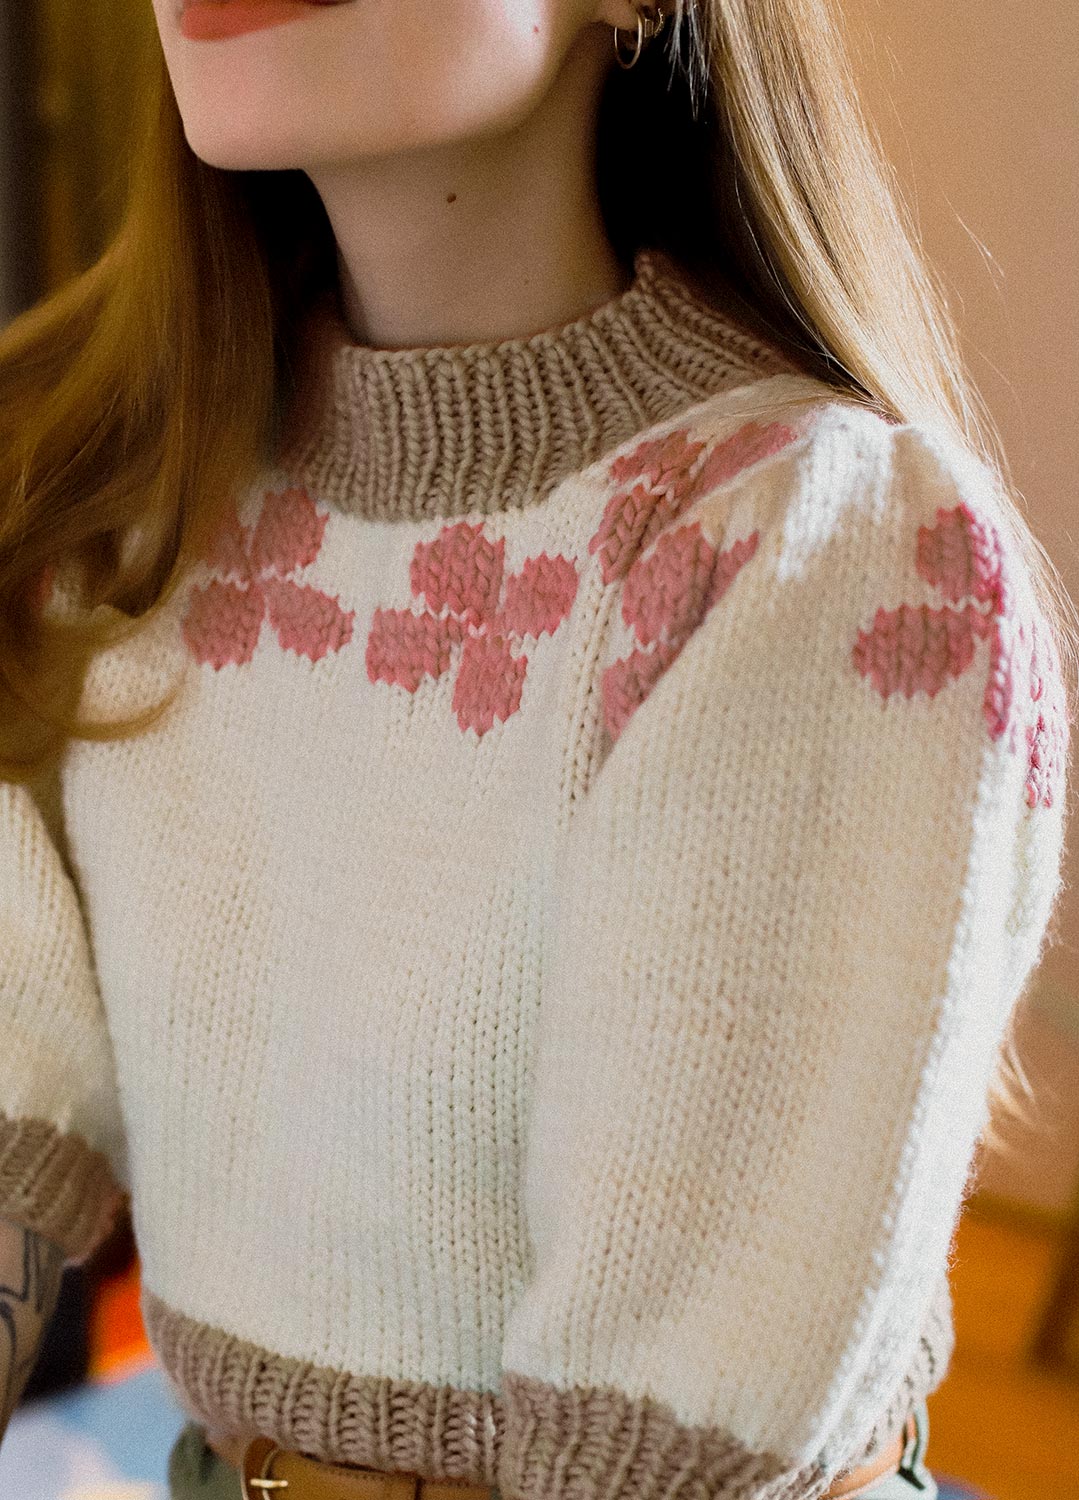 30 Best Soft Knit Sweaters ideas  sweaters, knitted sweaters, soft knit  sweaters